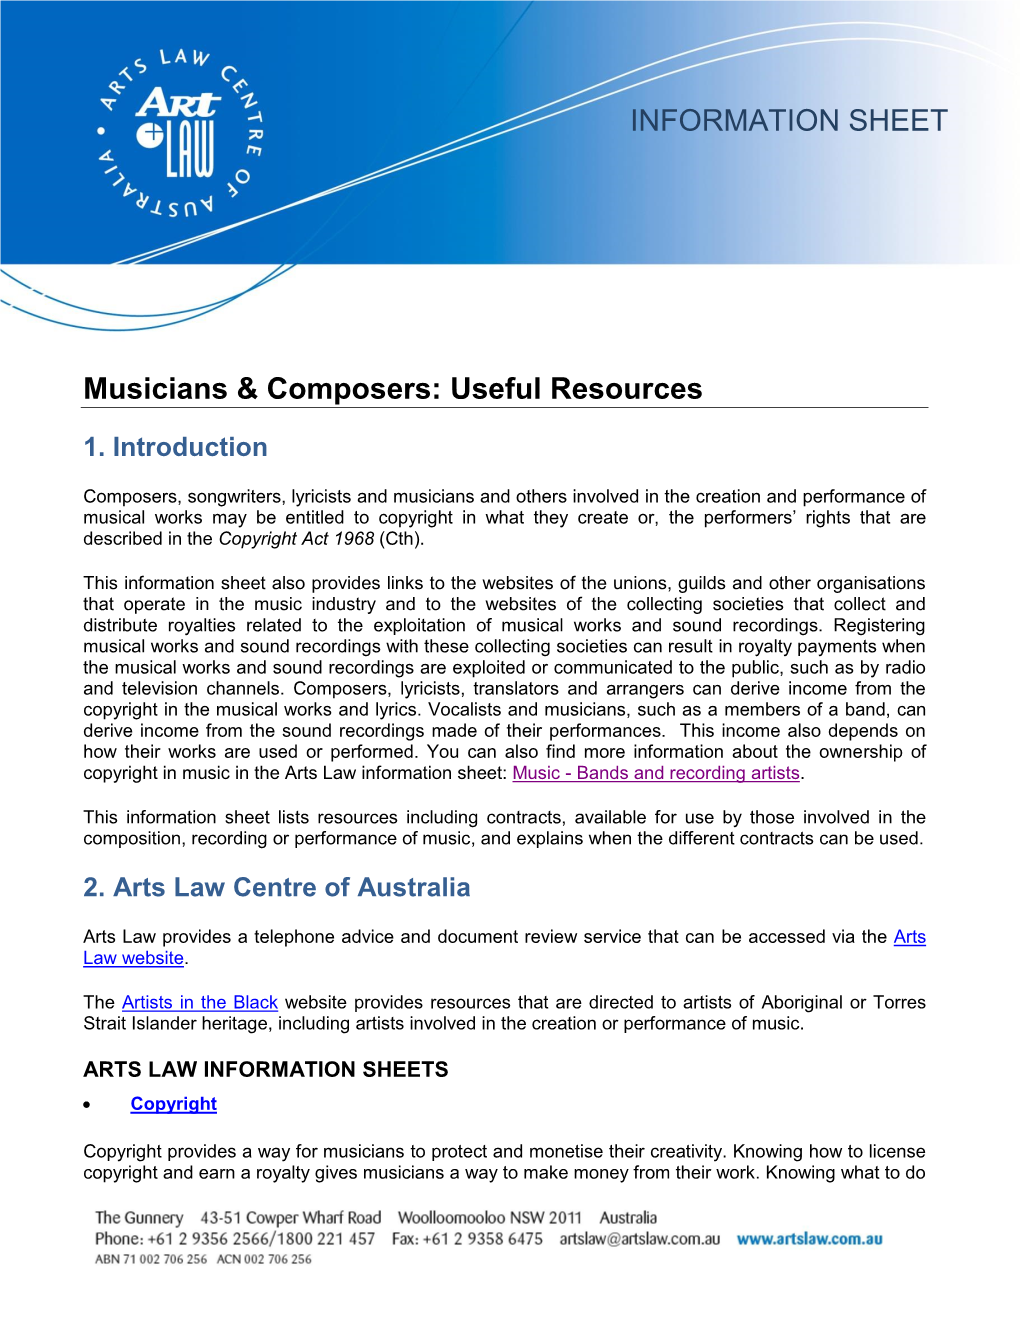 INFORMATION SHEET Musicians & Composers: Useful Resources